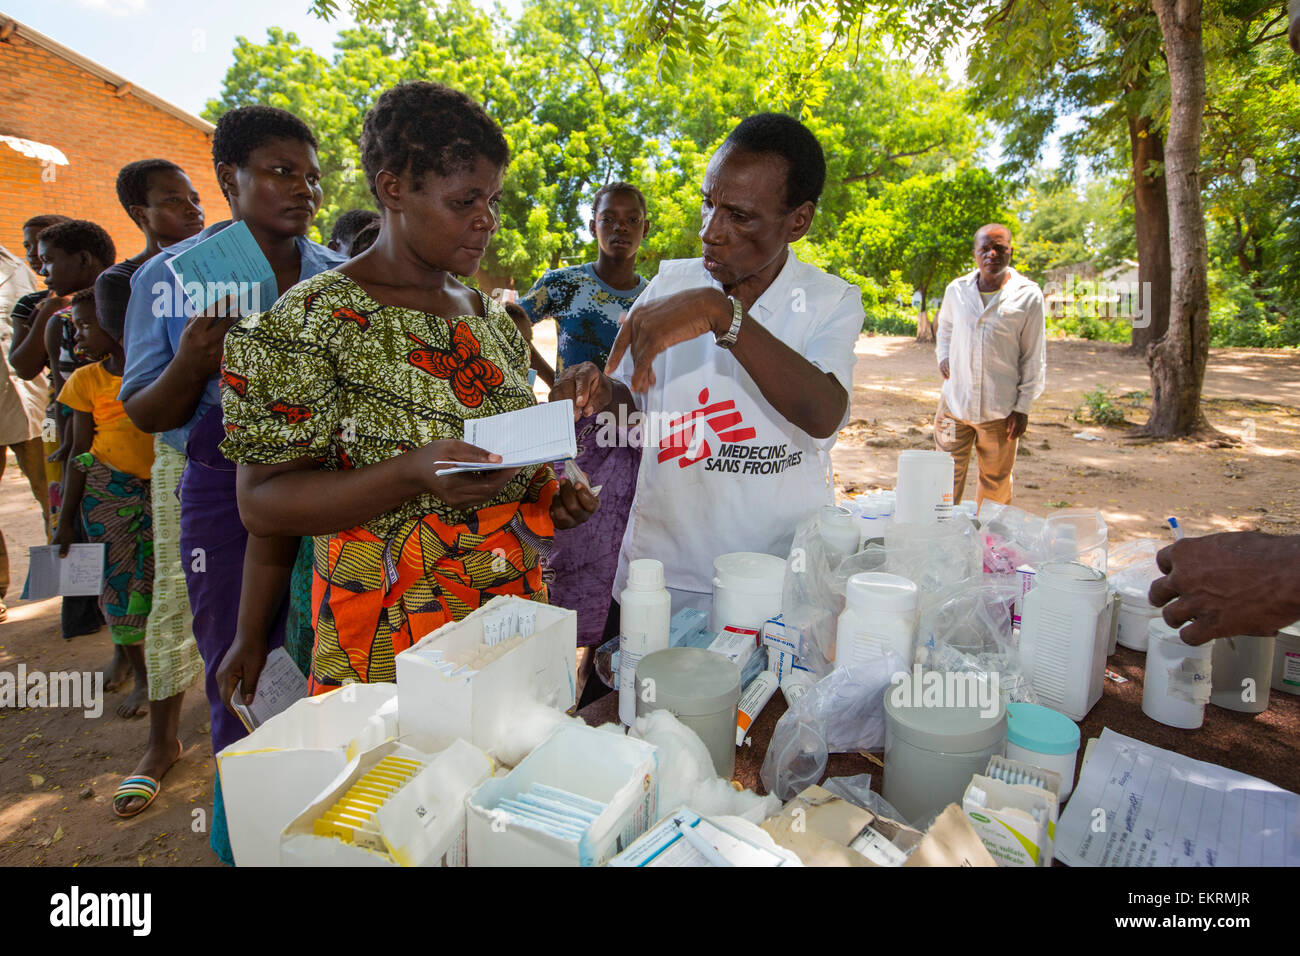 January 2015 saw a three day period of excessive rain which brought unprecedented floods to the small poor African country of Malawi. It displaced nearly quarter of a million people, devastated 64,000 hectares of land, and killed several hundred people. This shot shows A Medicin Sans Frontieres clinic in Makhanga providing Malaria treatment drugs to local people, many of whom now have malaria, as a result of the drying up flood waters providing ideal breeding grounds for mosquitoes. Stock Photo